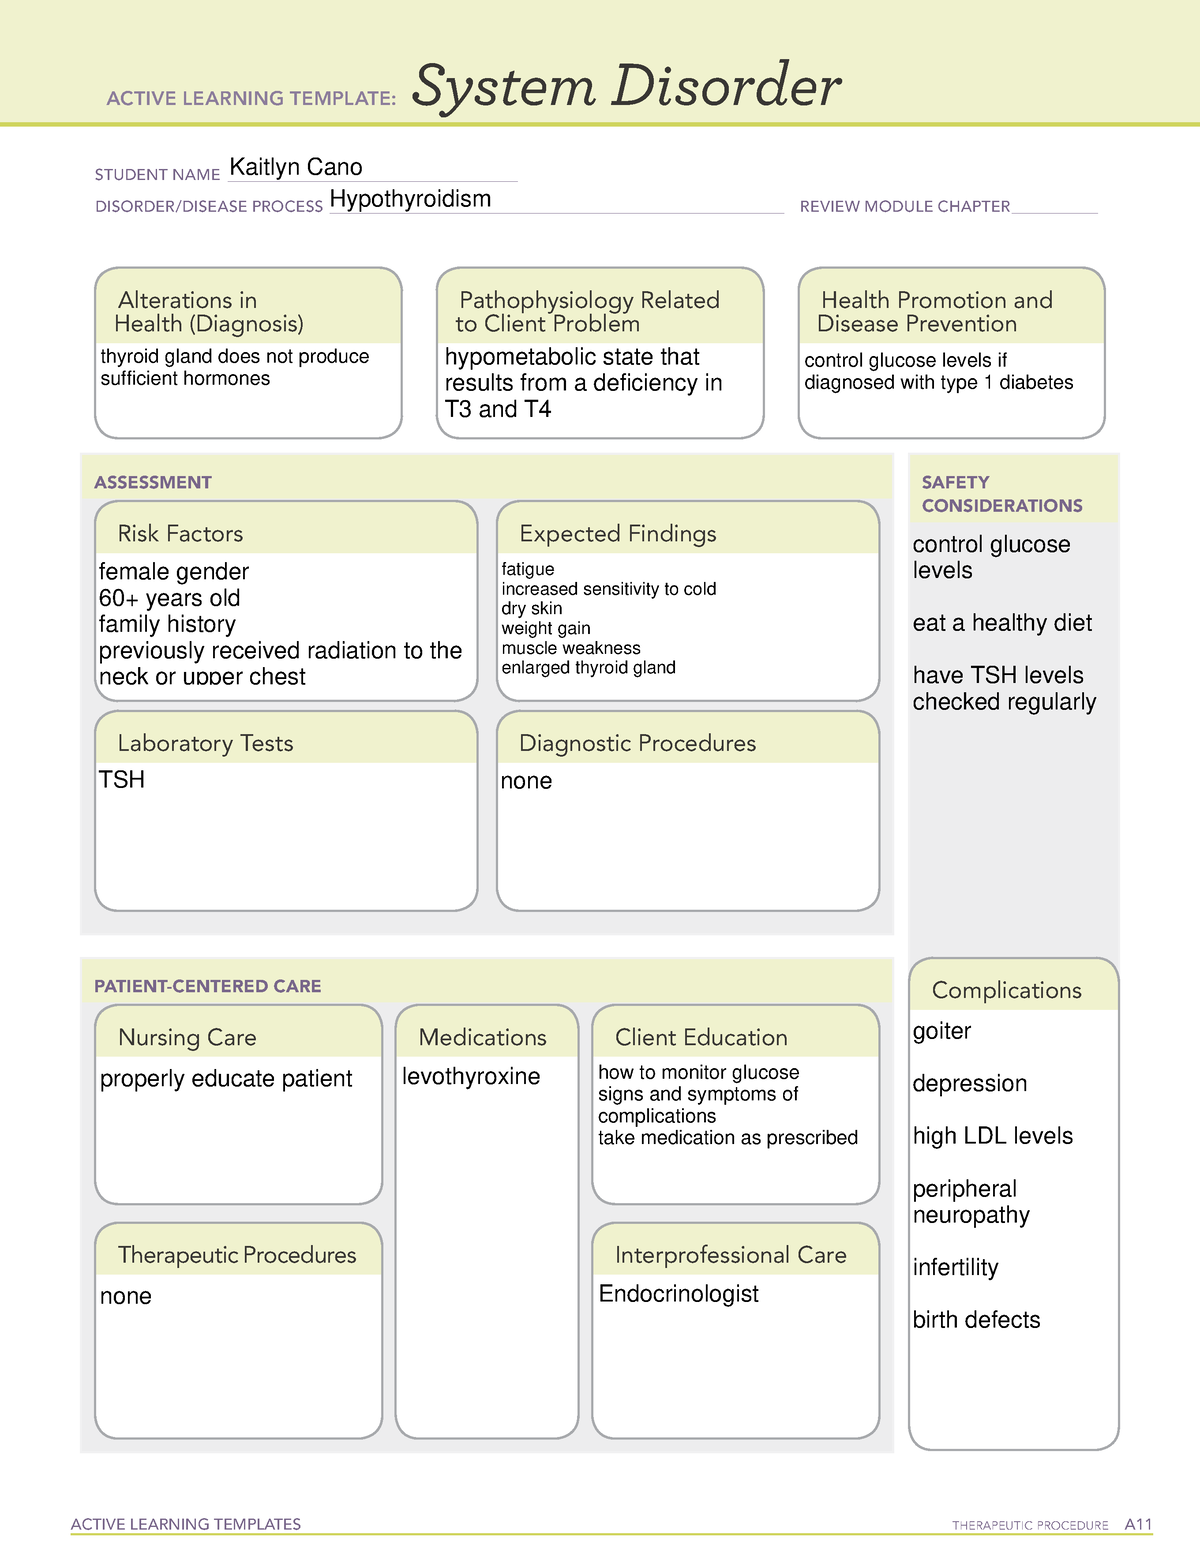 Hypothyroidism Template ACTIVE LEARNING TEMPLATES THERAPEUTIC